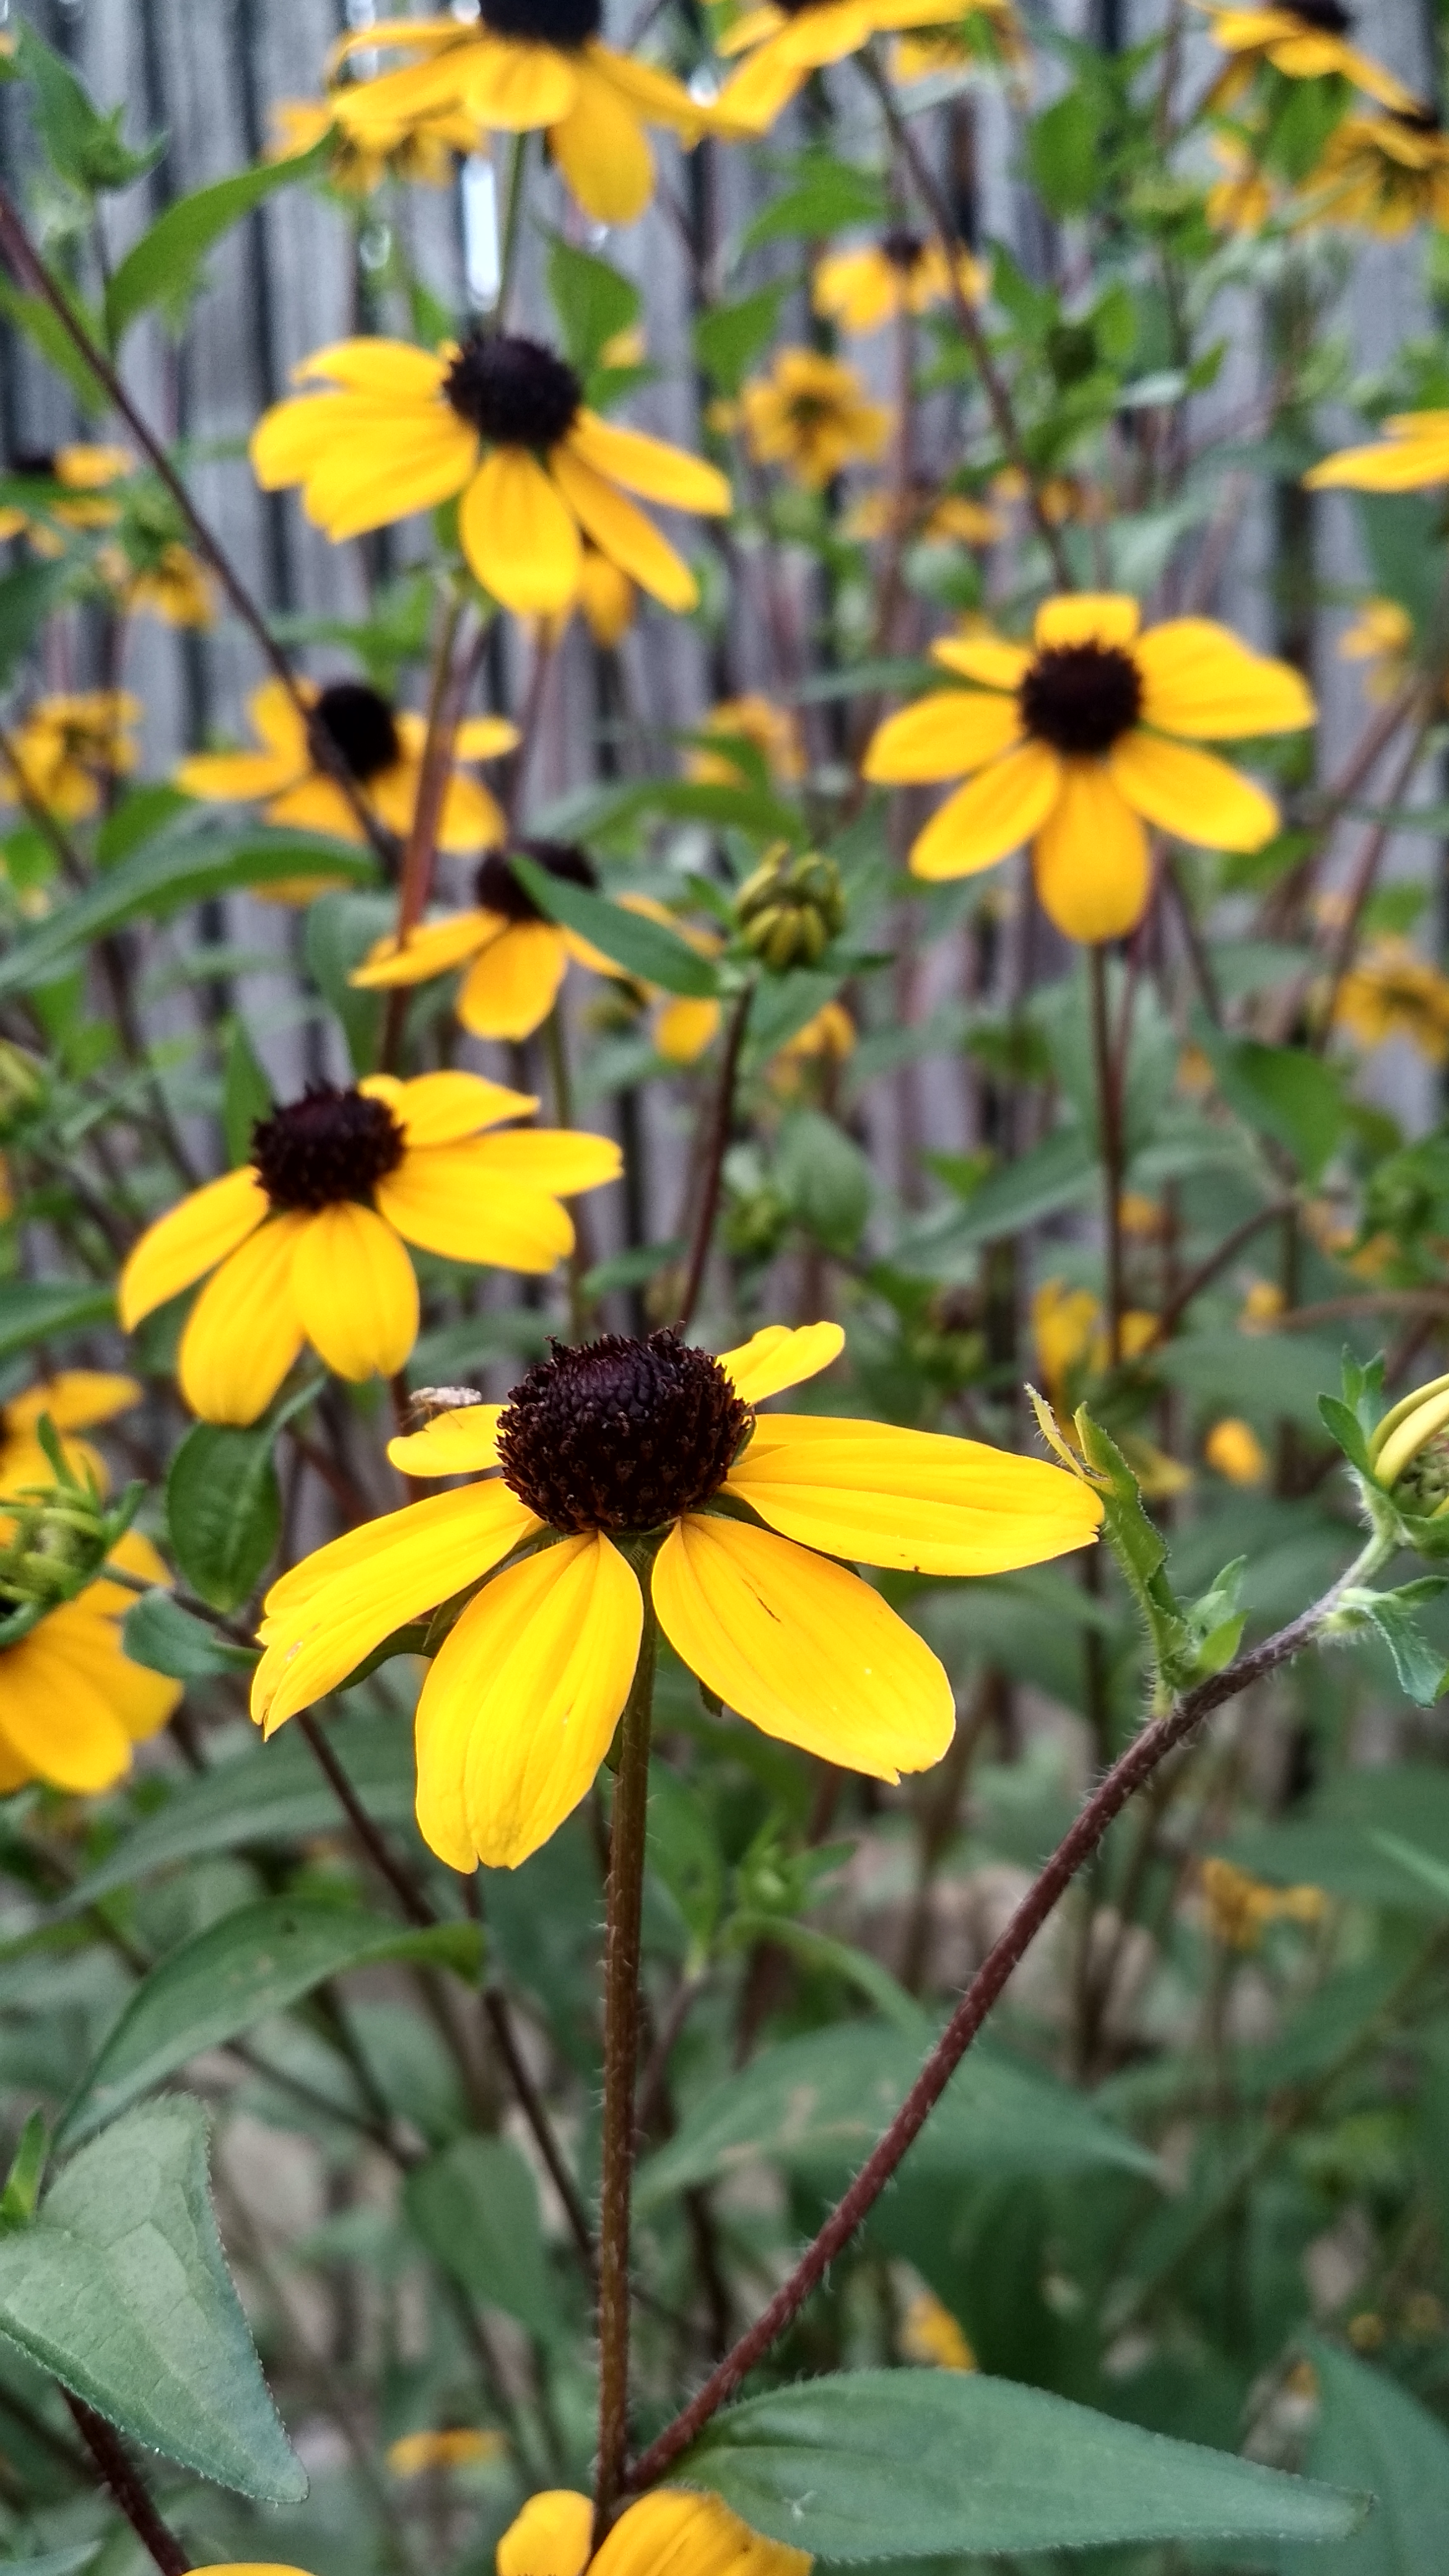 Black-Eyed Susan Picture by RealPitchers